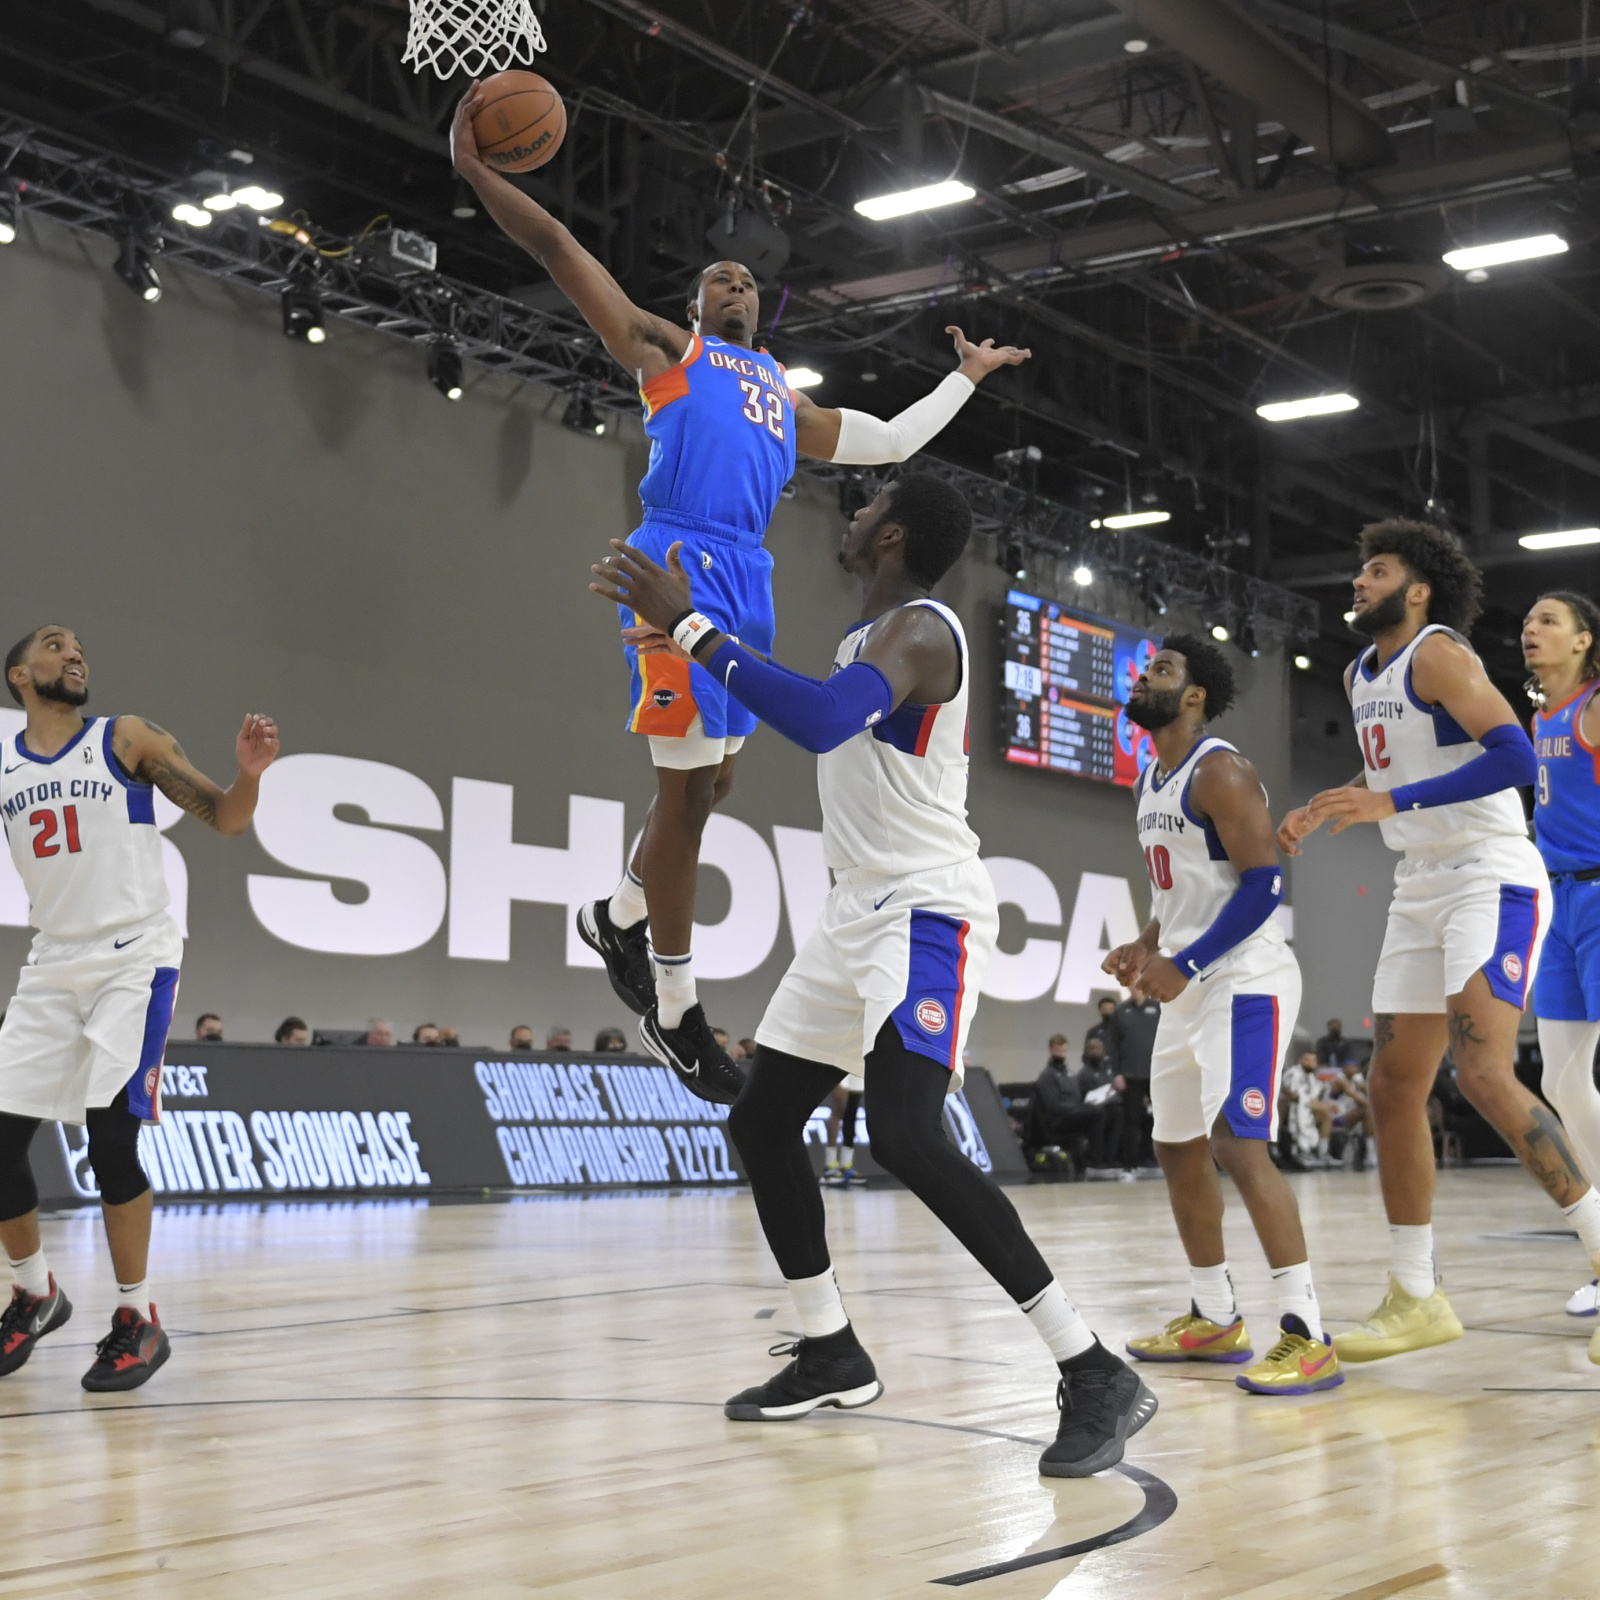 NBA G League Showcase 2021 Results: Top Scores, Highlights and